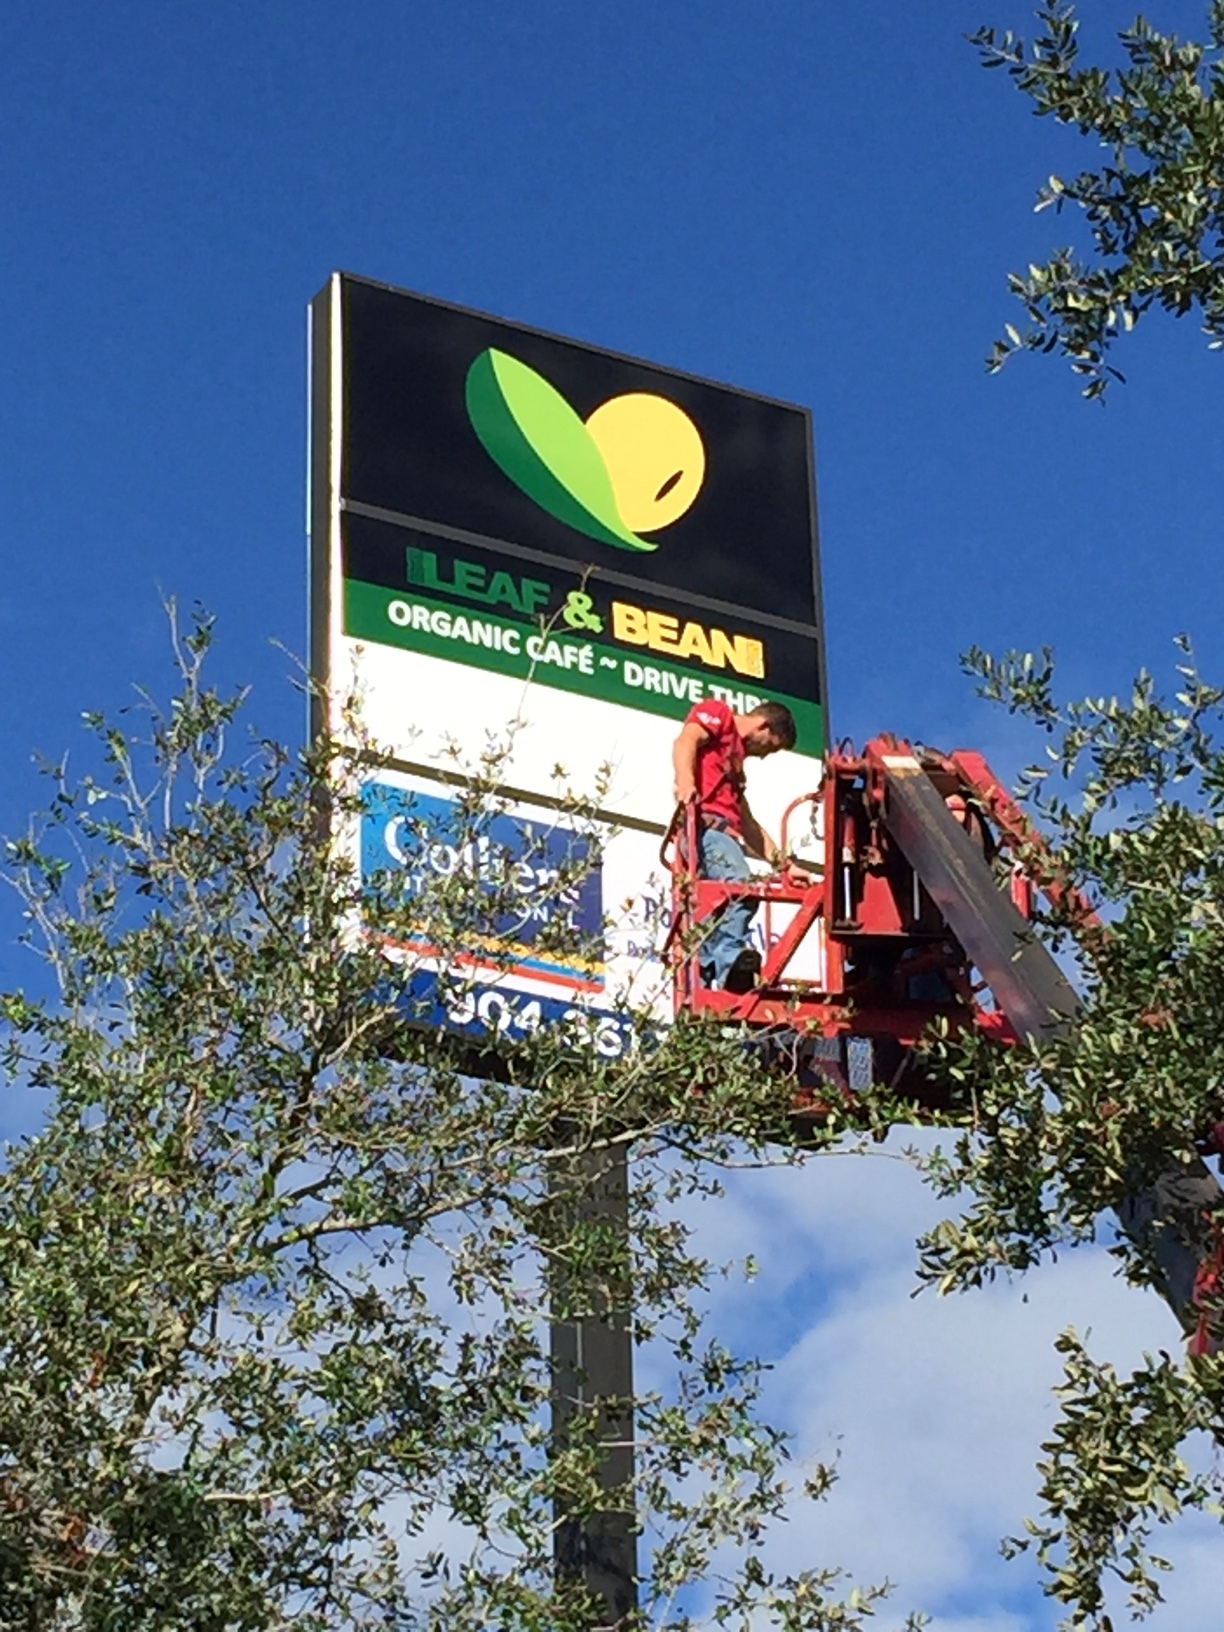 Signarama hoisted the Leaf & Bean signs Wednesday to the sign pole at Intracoastal Plaza.